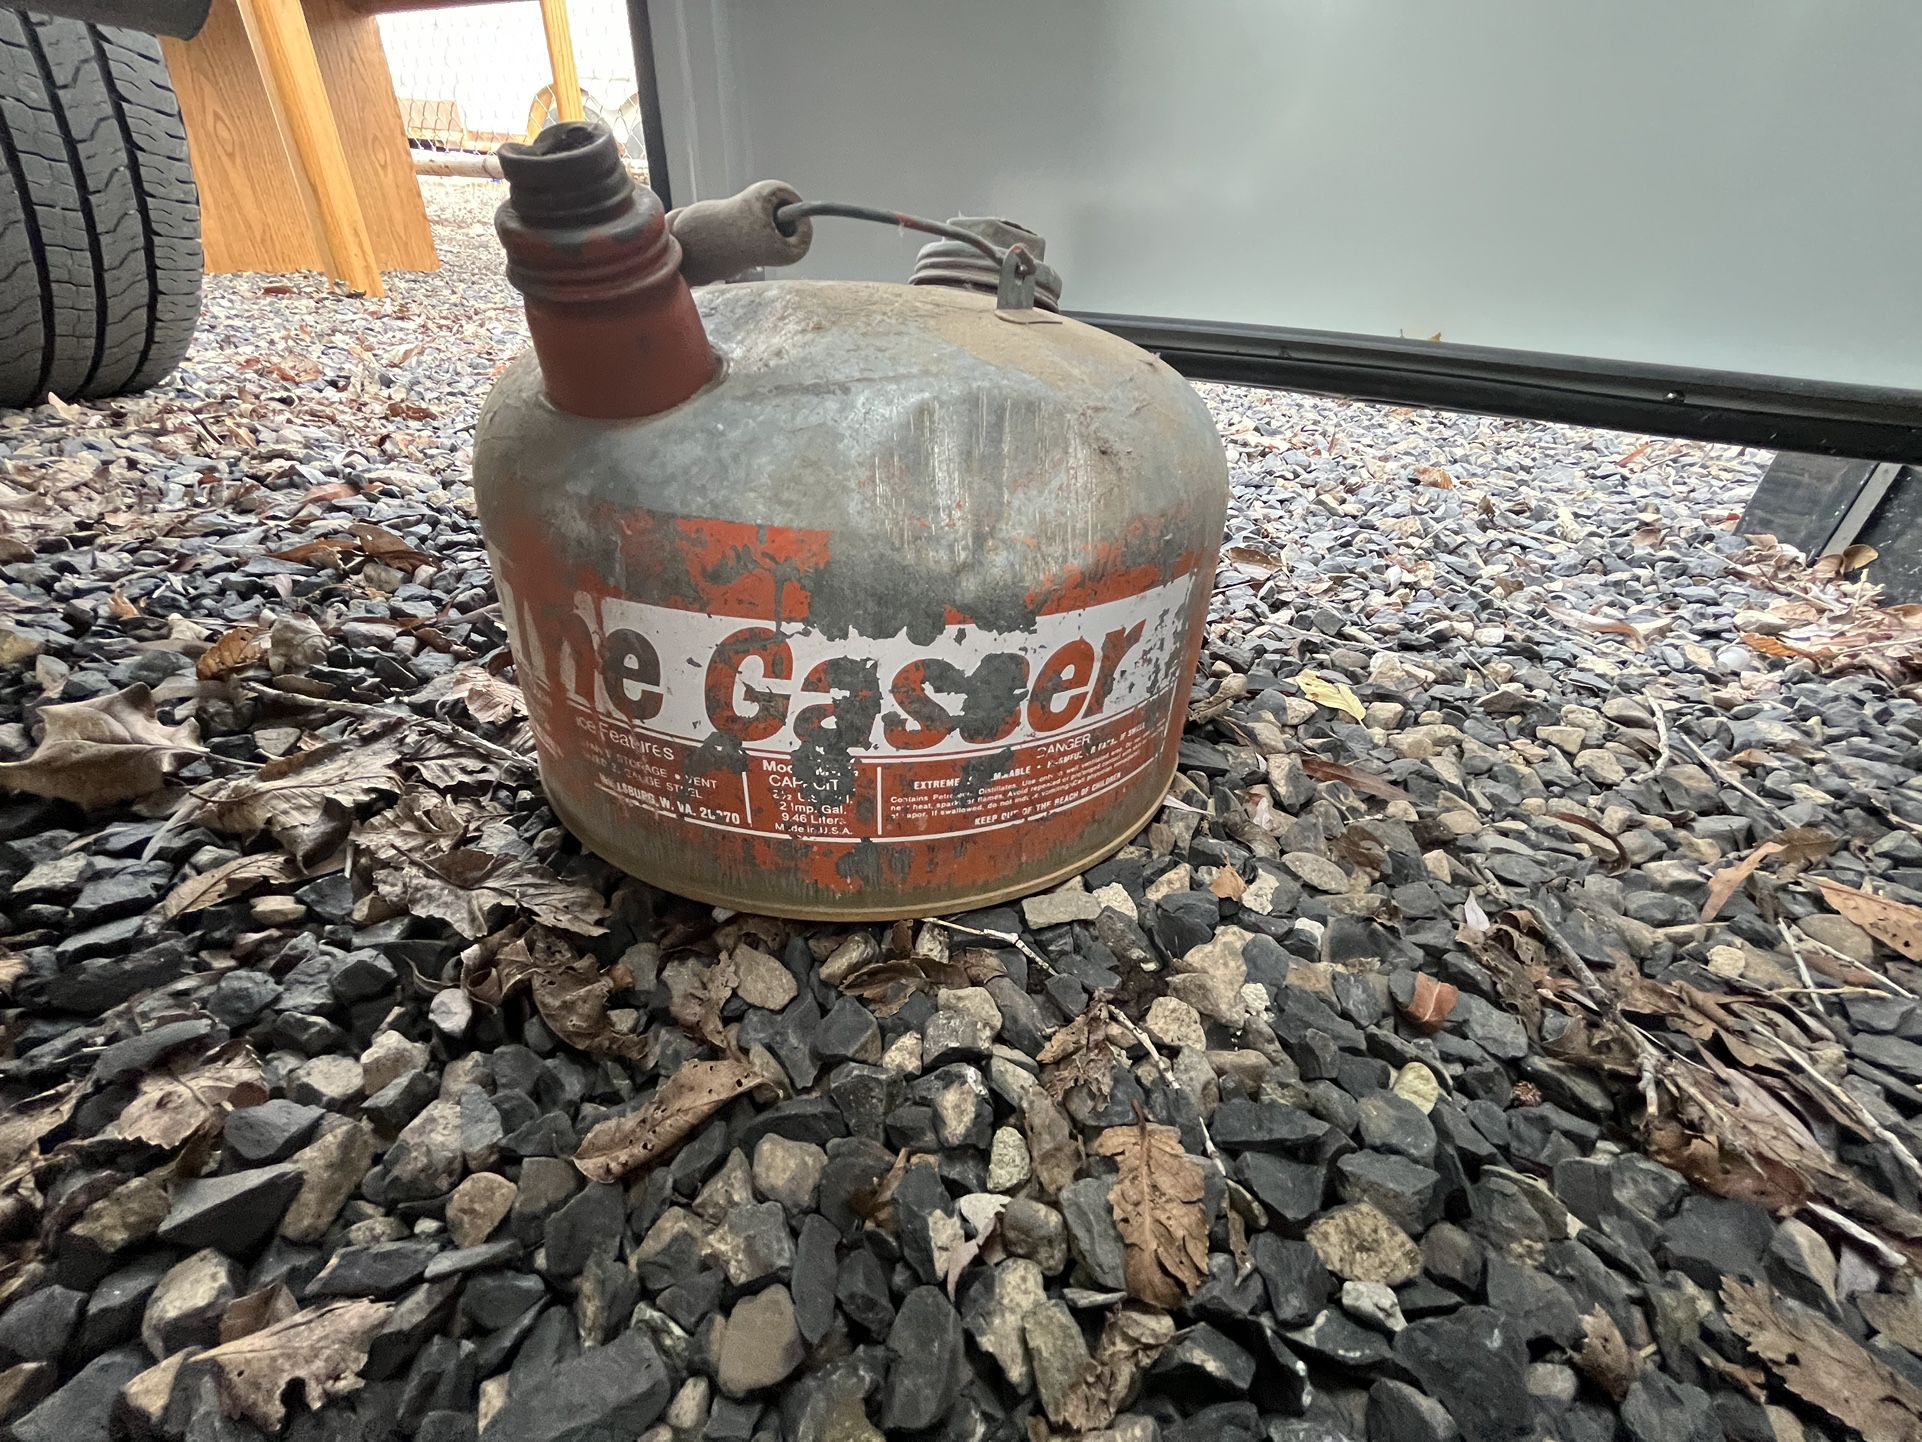 “The Gasser” Old Gas Can